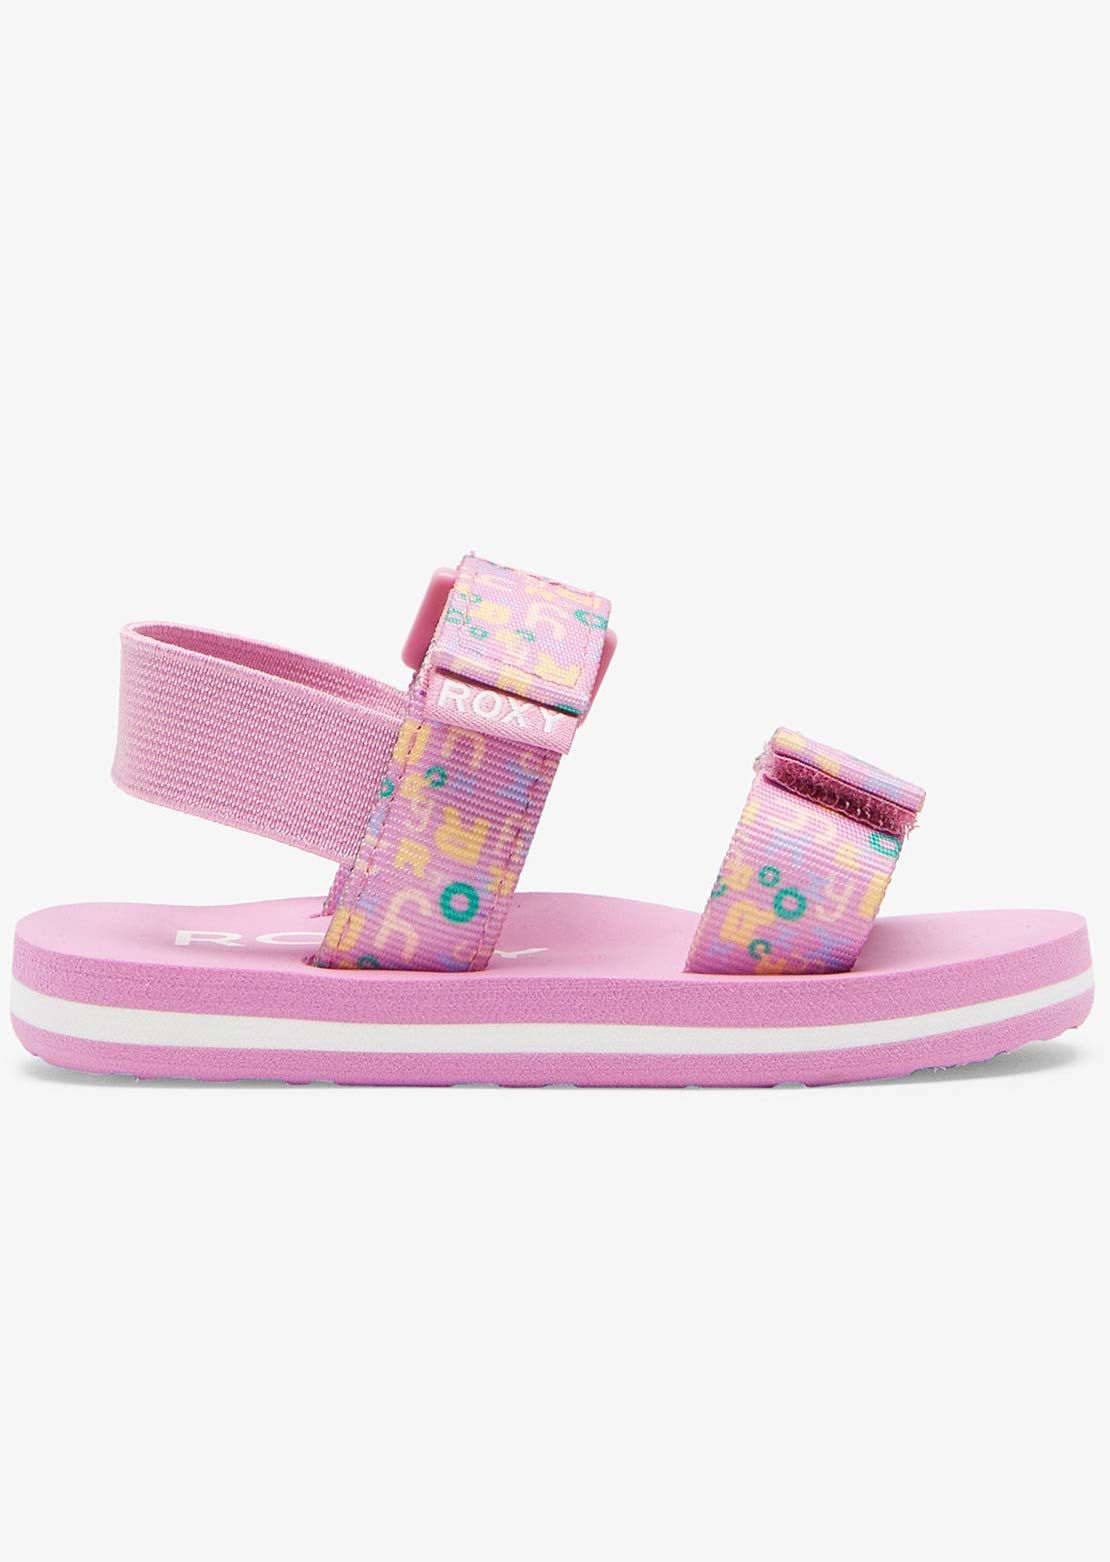 Roxy Toddler TW Roxy Cage Sandals Super Pink